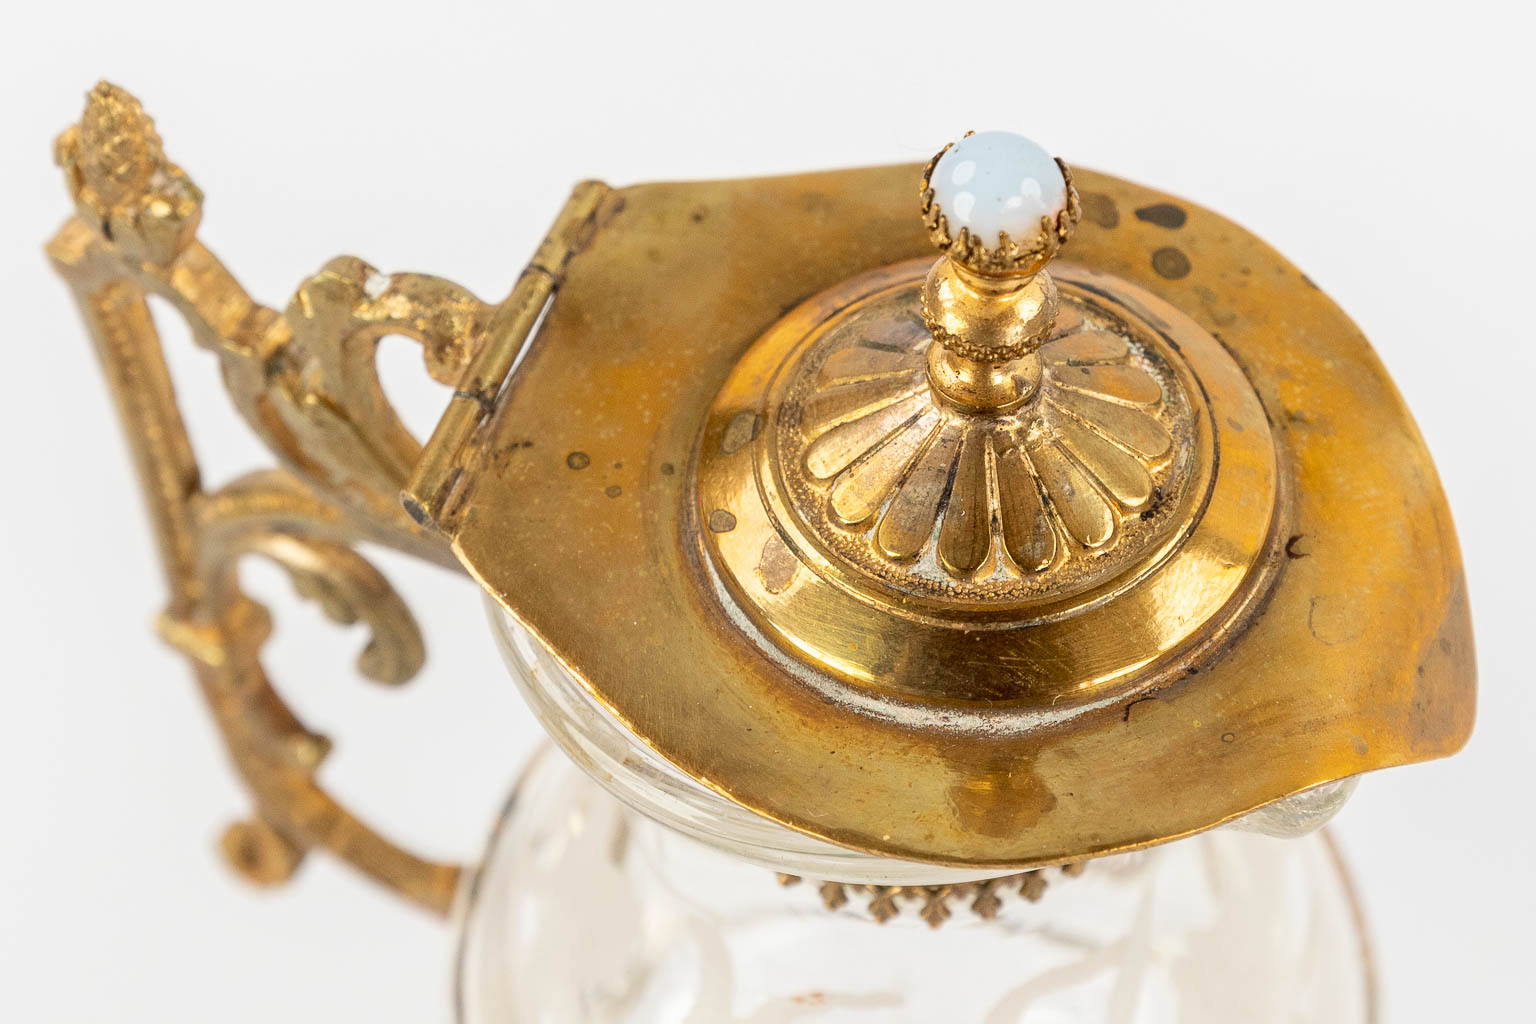 A pair of wine and water cruets made of glass and gold-plated bronze. 19th C. (L: 17 x W: 26 x H: 14 cm)